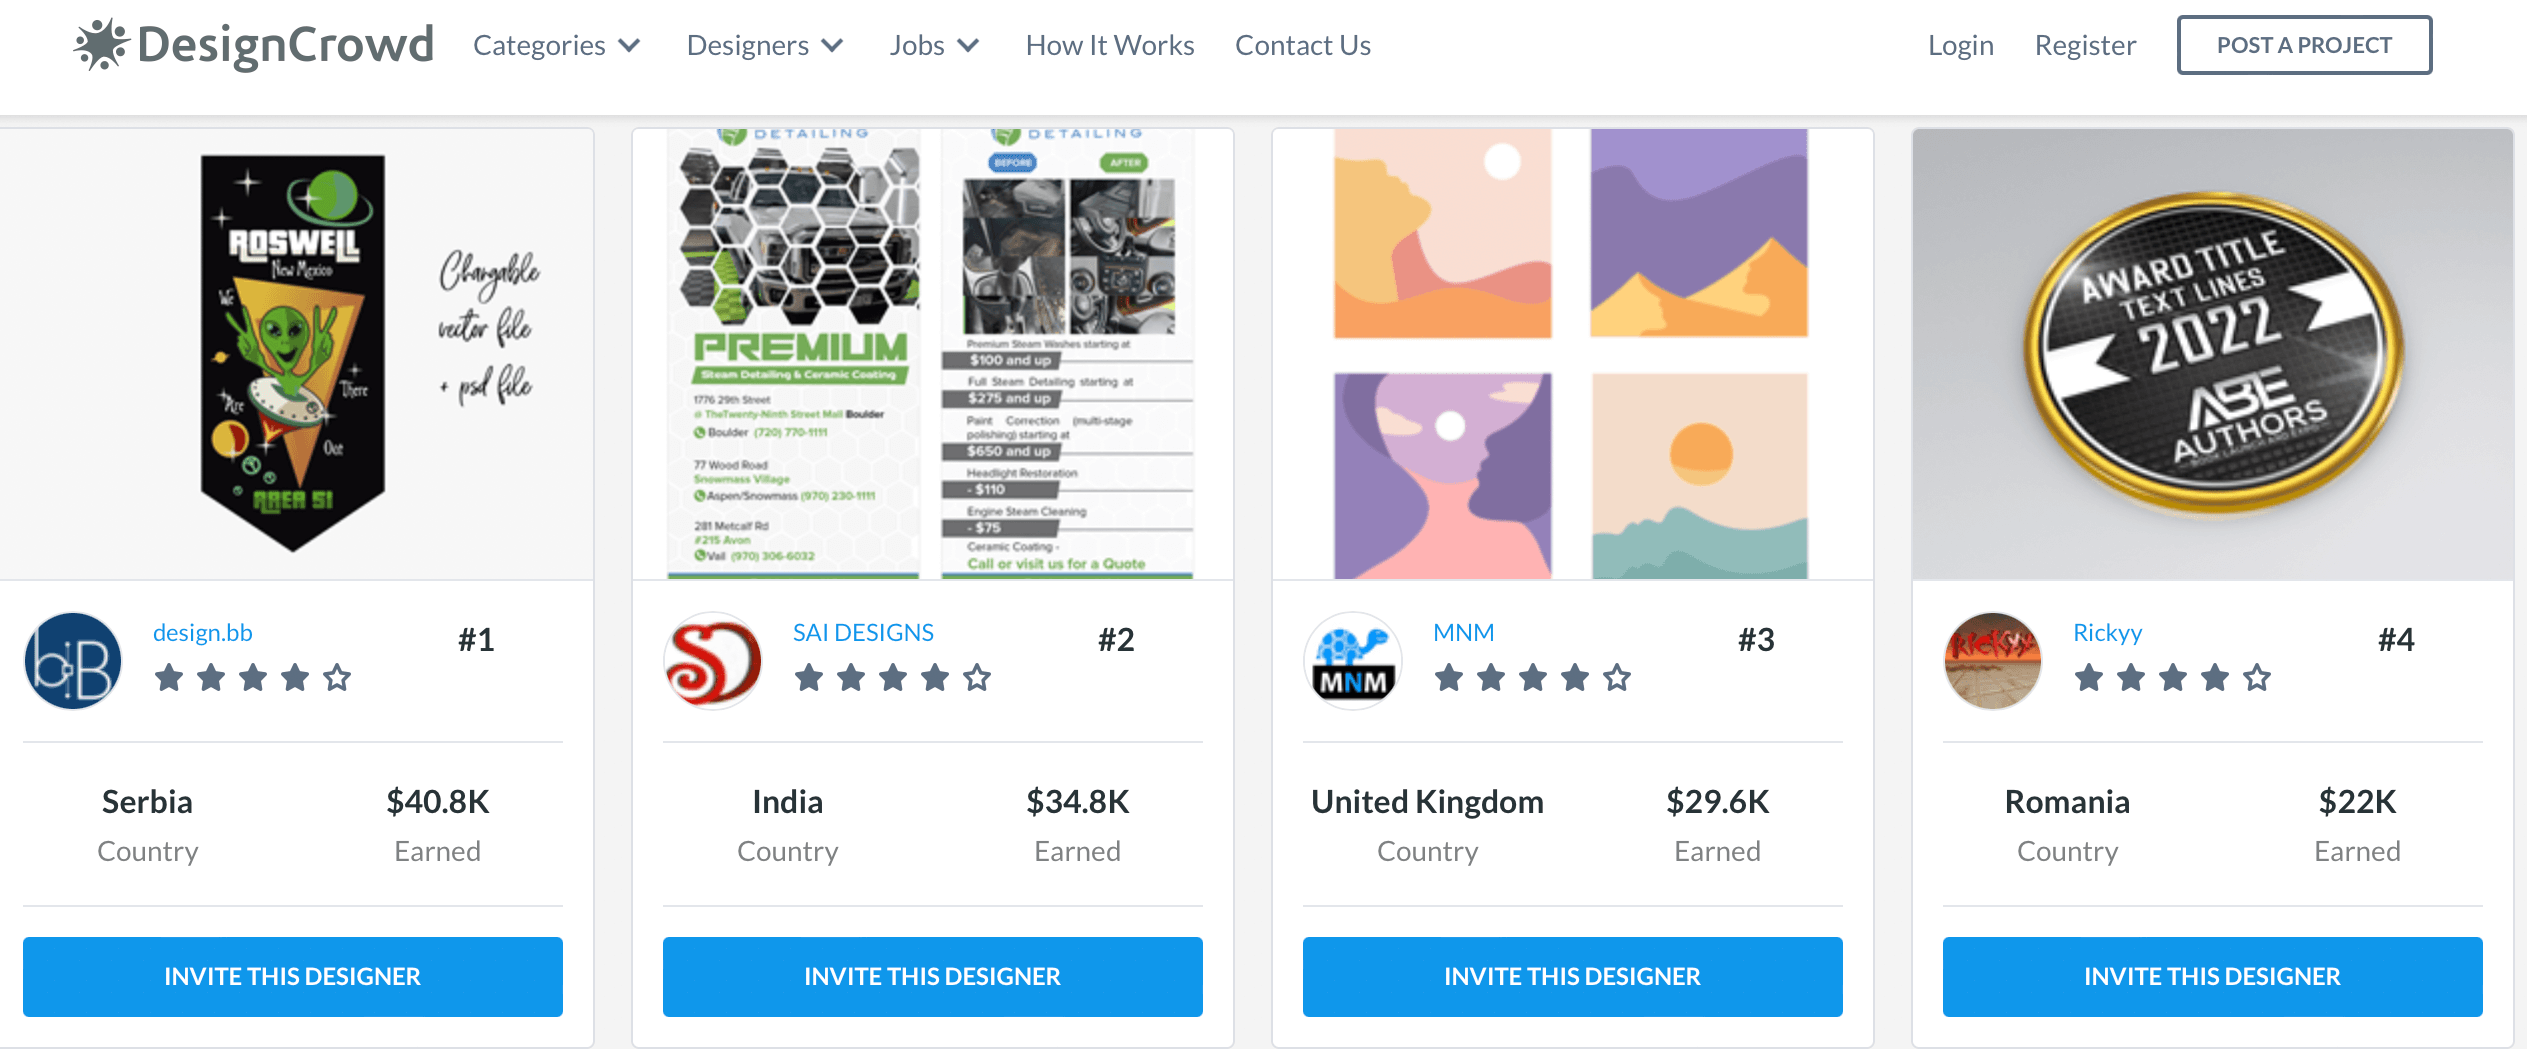 Designers’ profits from the design crowd website